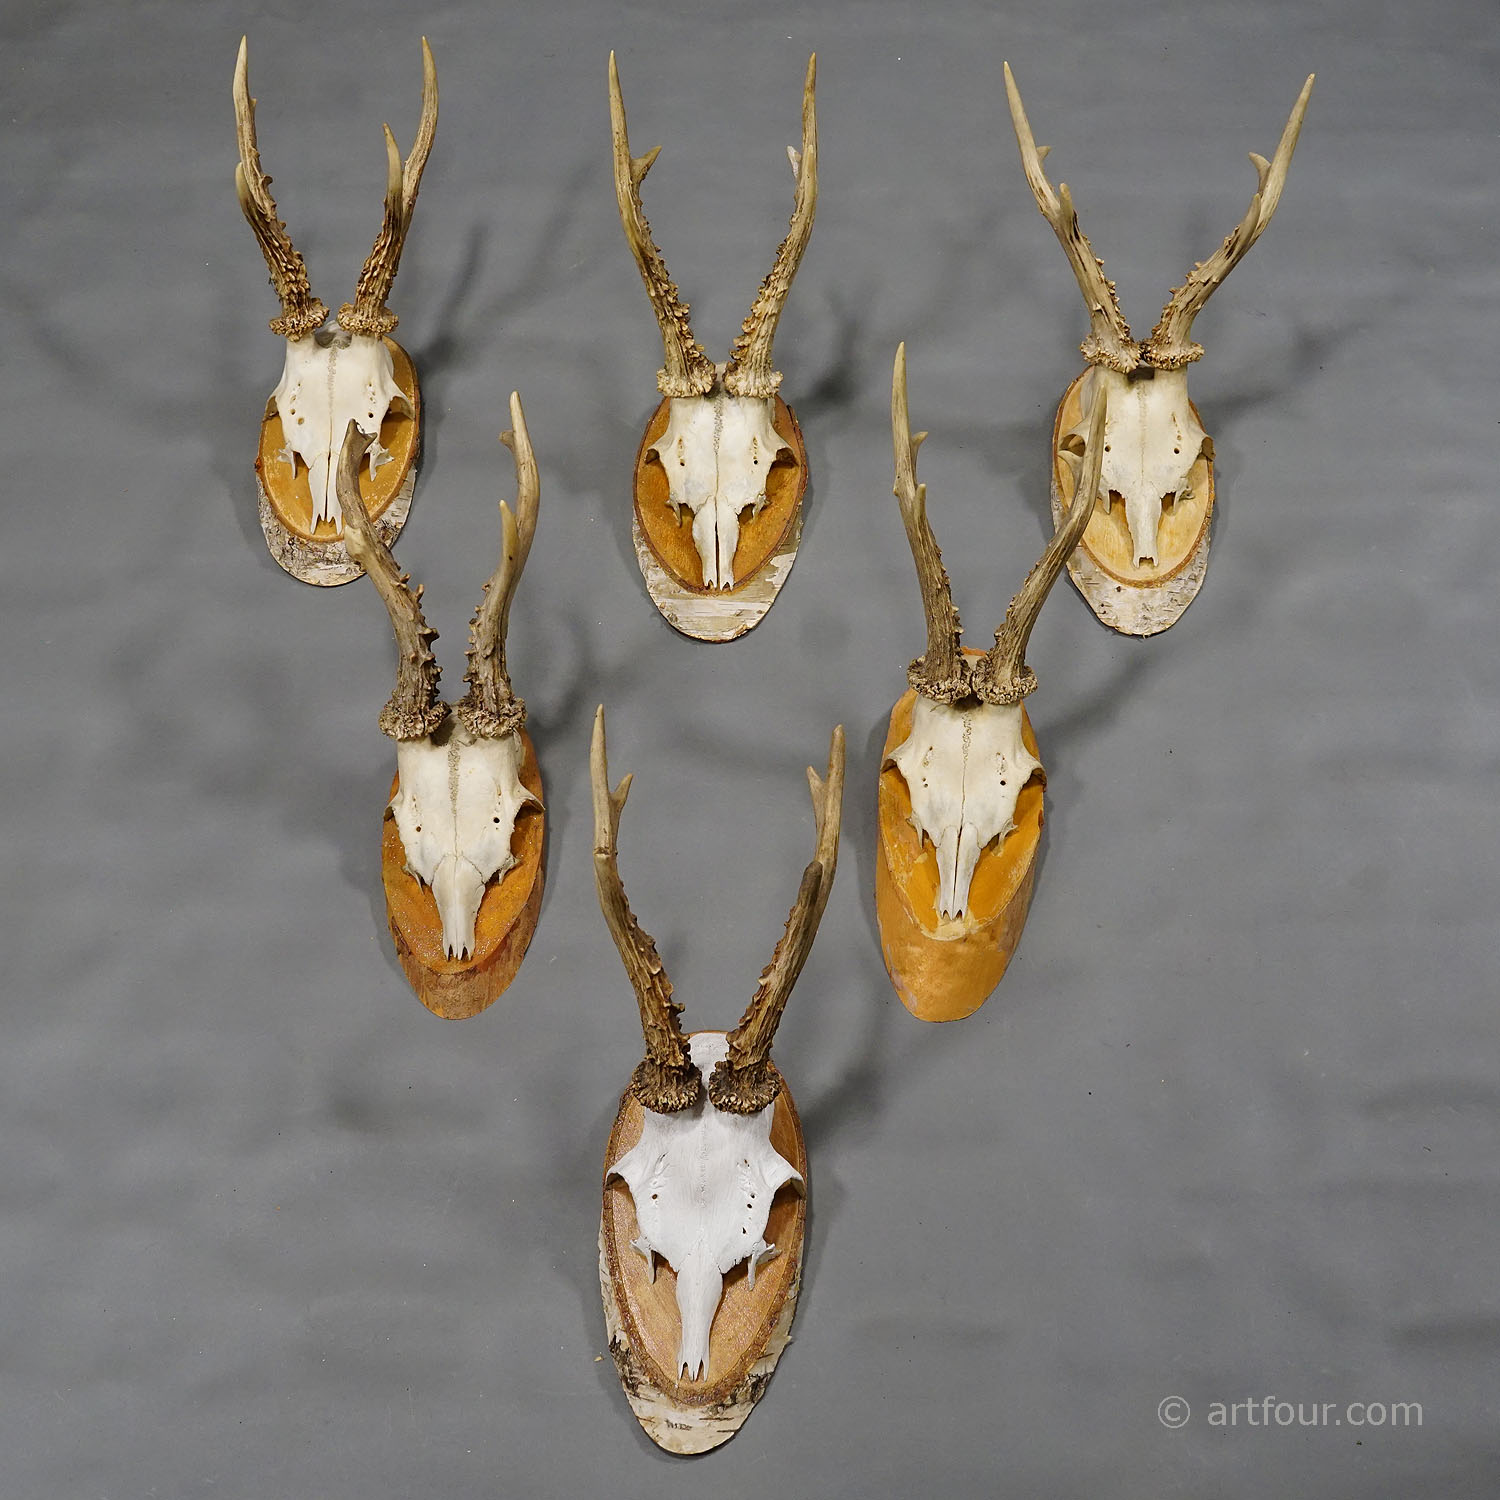 Six Large Vintage Deer Trophies on Wooden Plaques Germany ca. 1950s